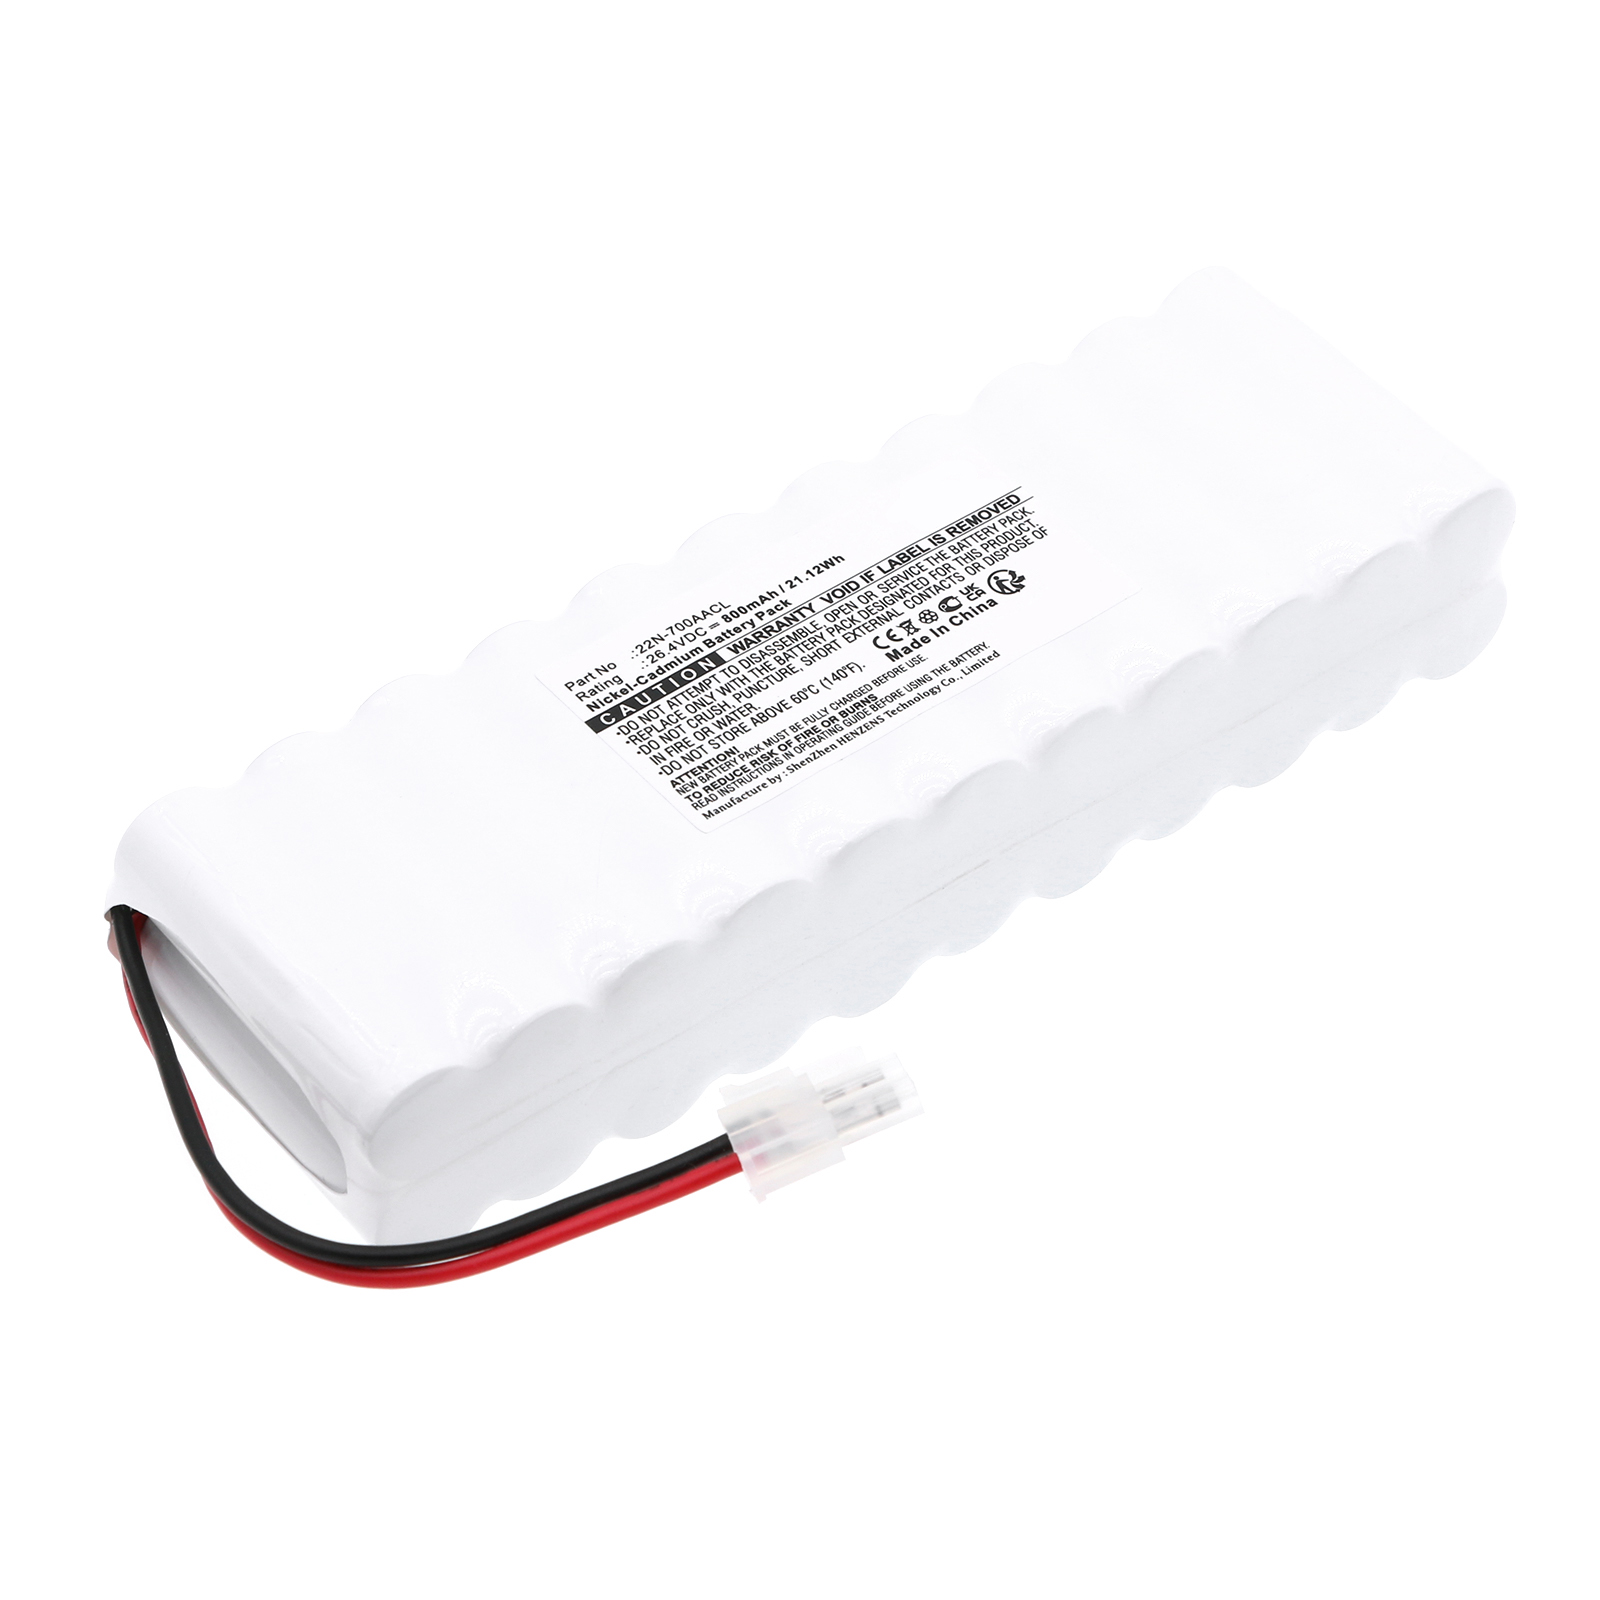 Batteries for EpsonPLC